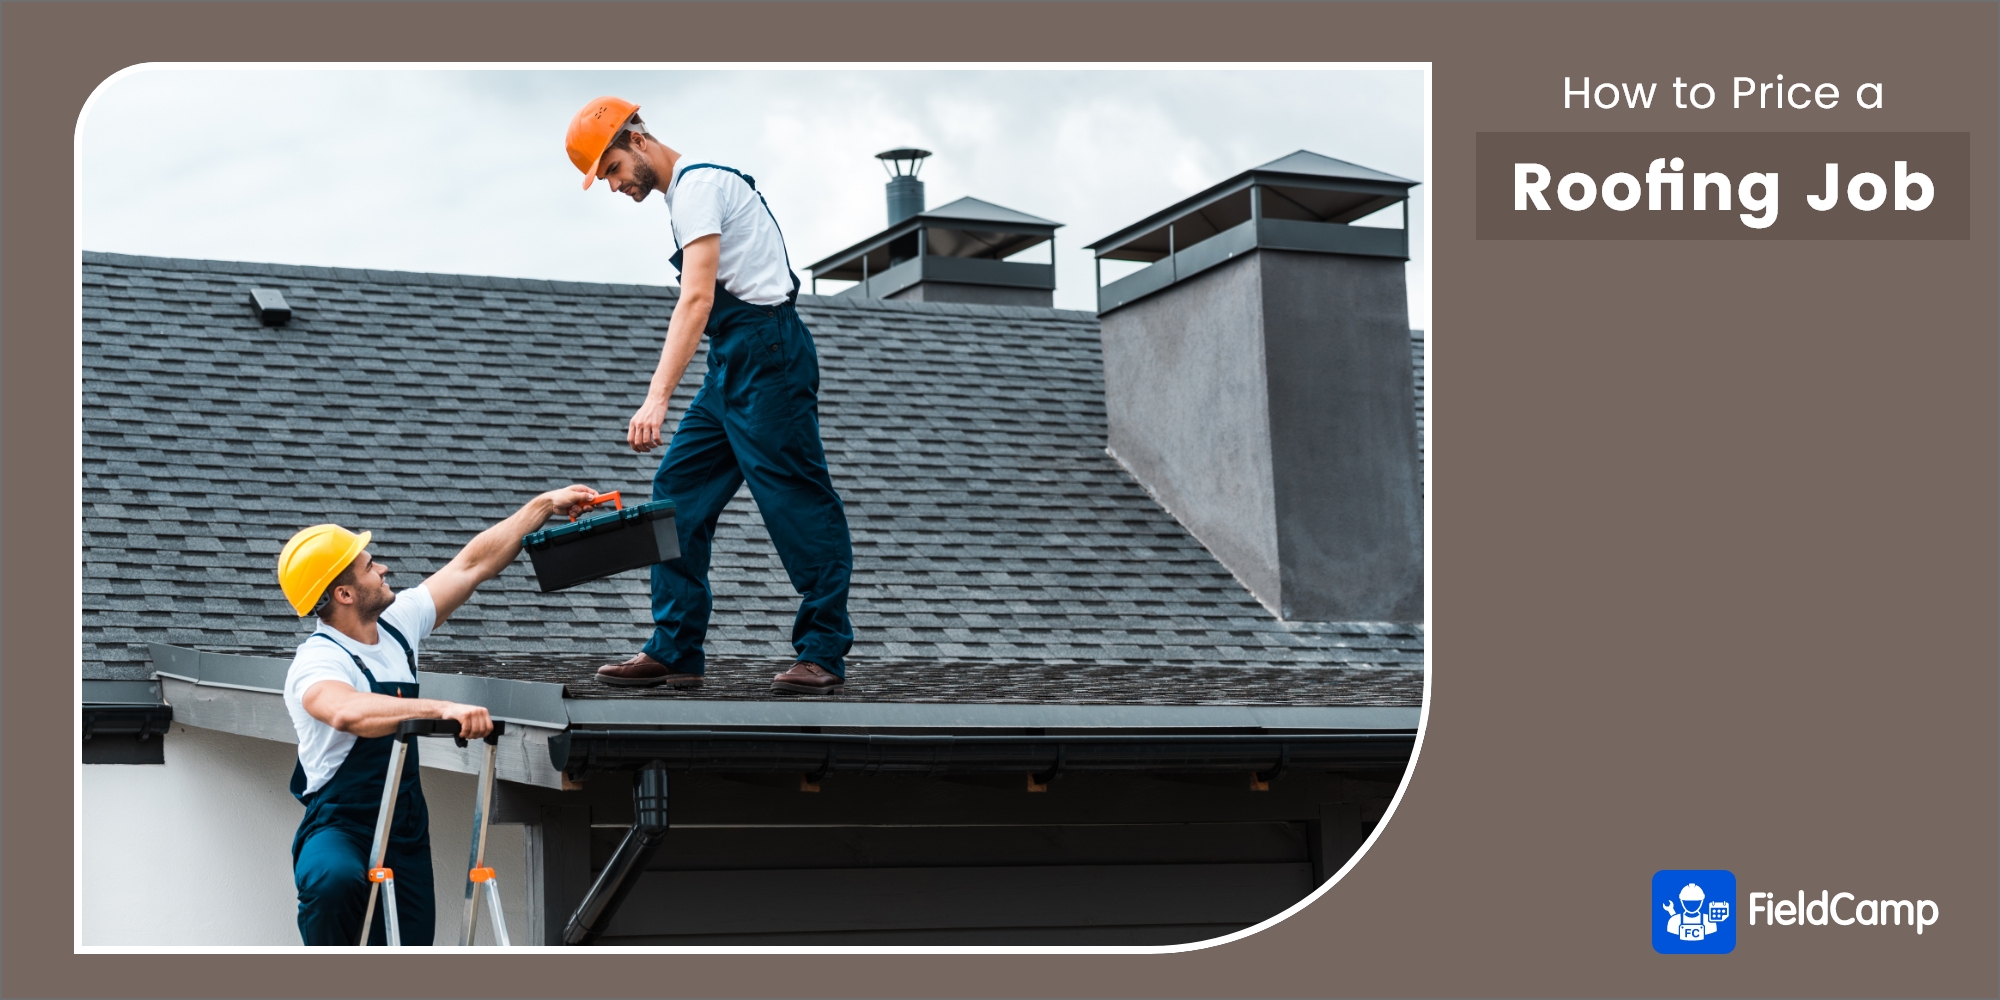 How to Price a Roofing Job